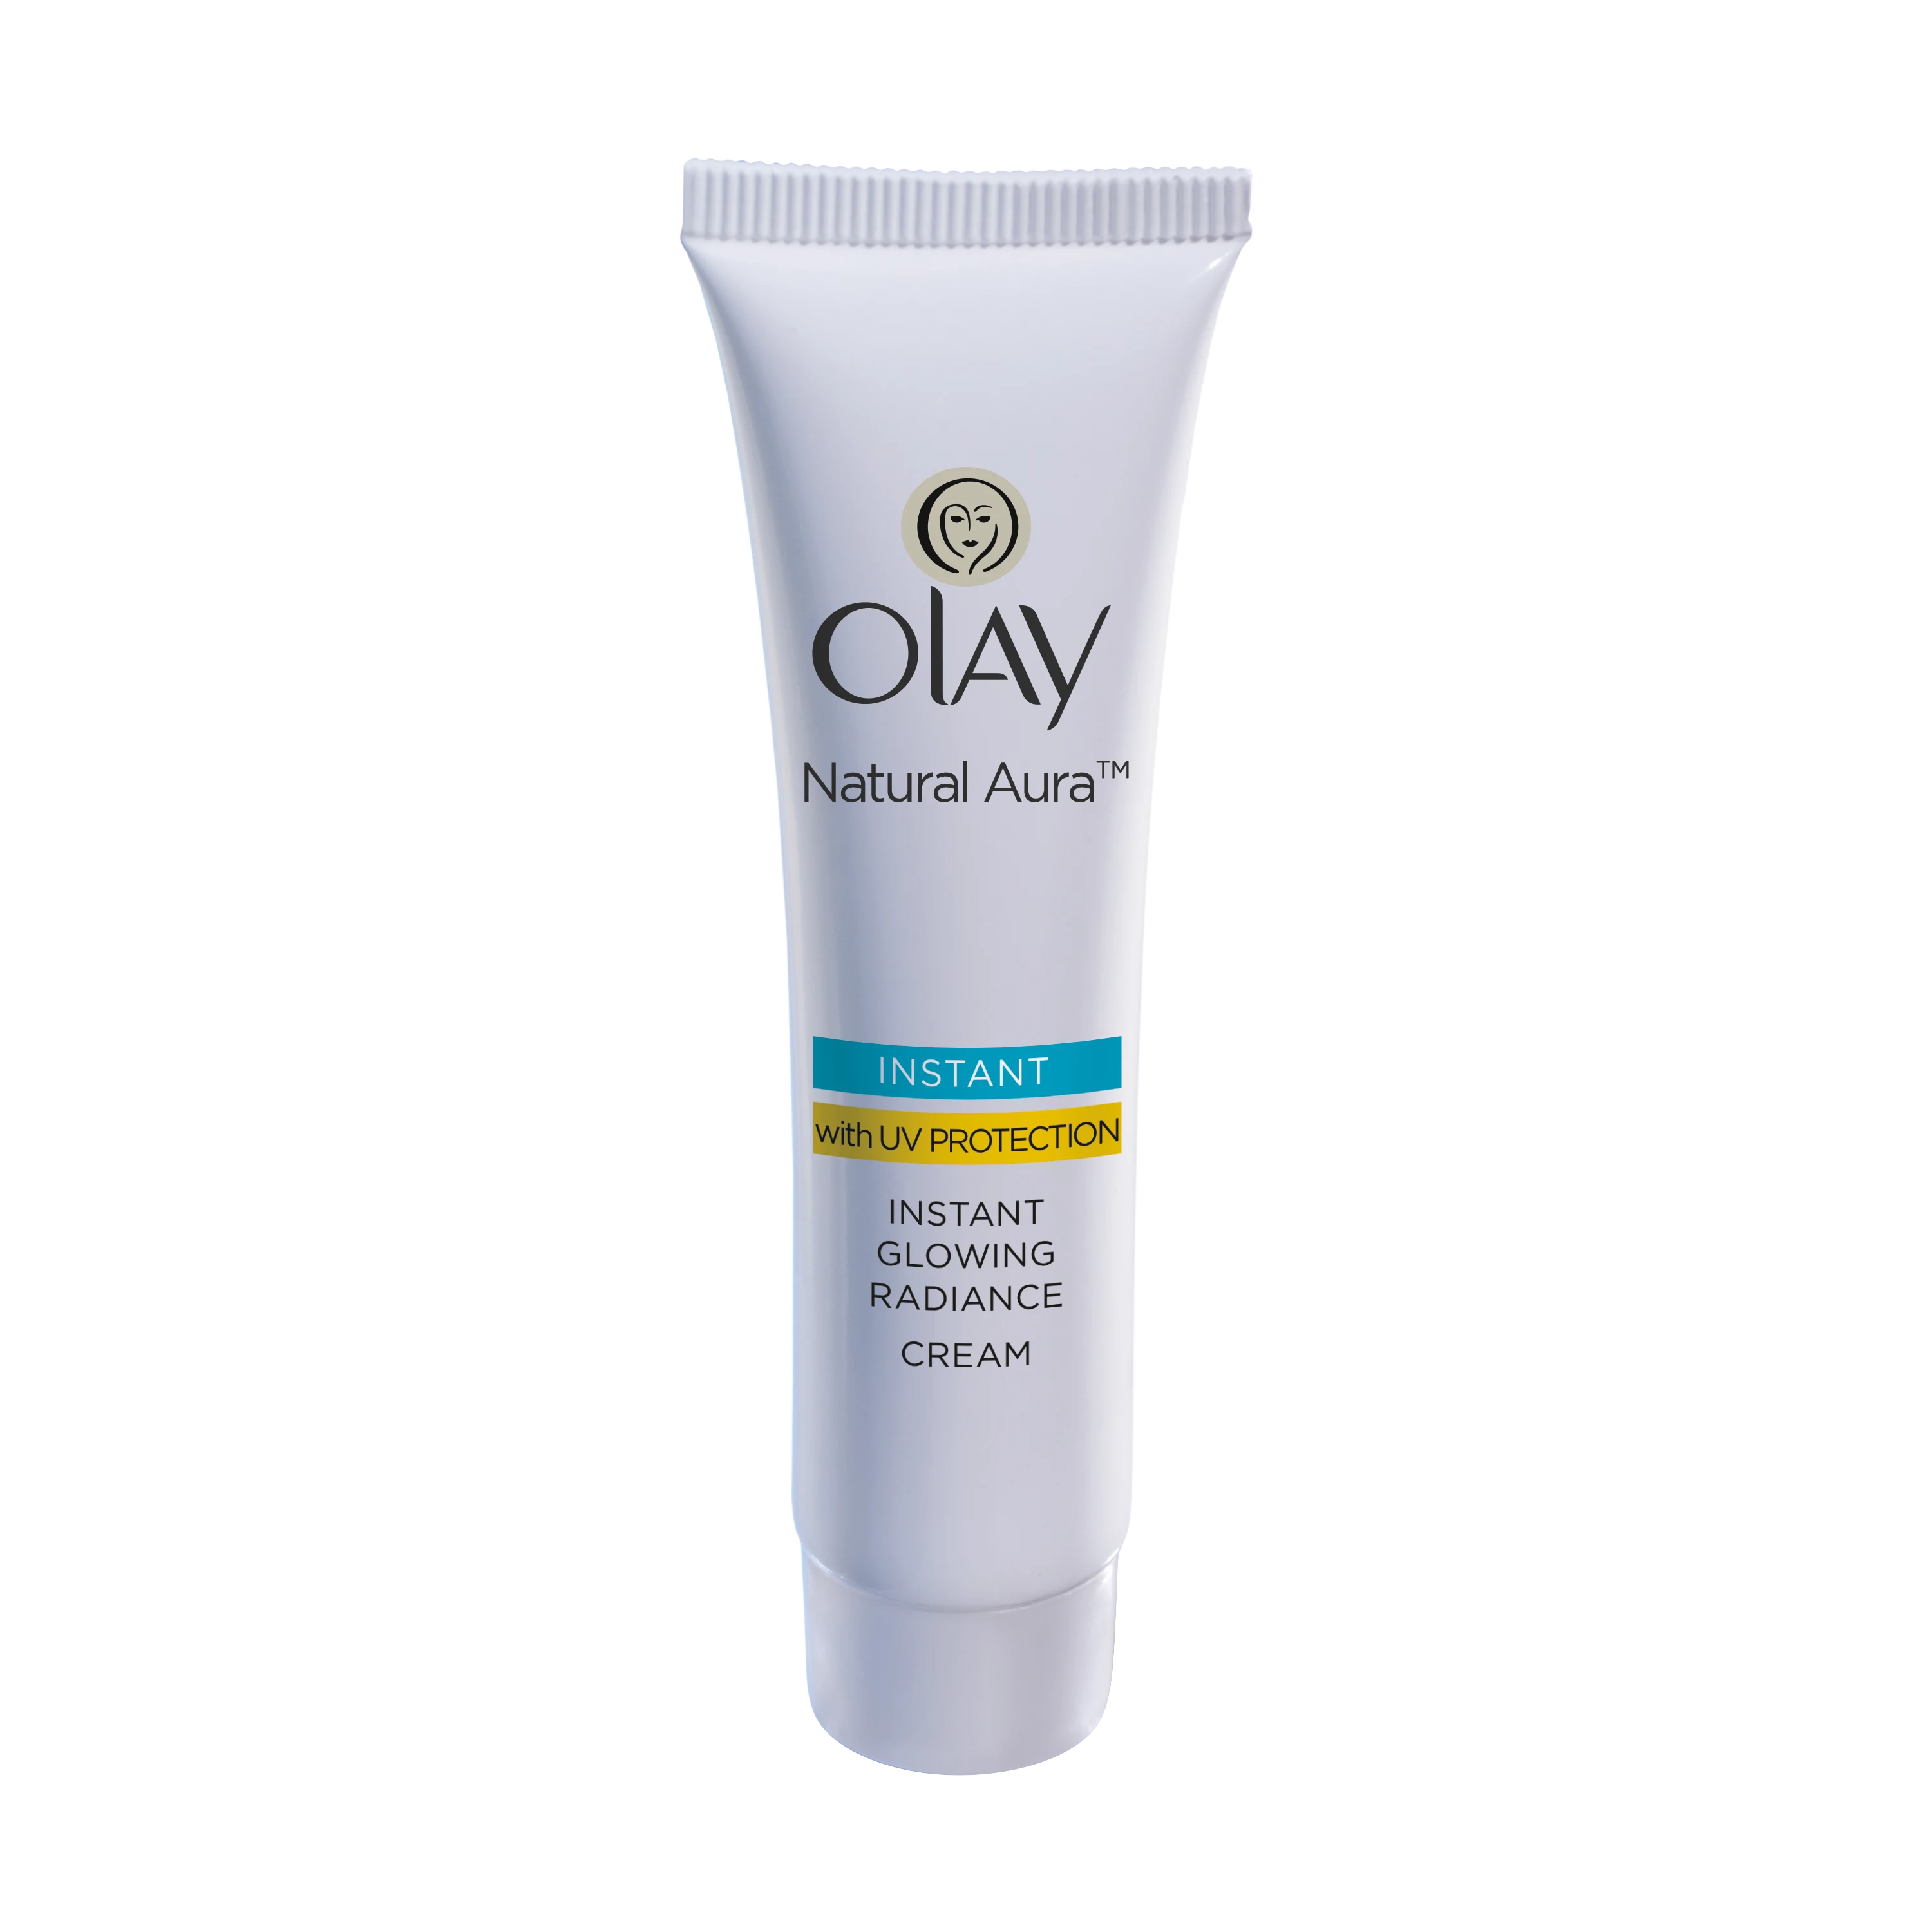 PDP IN - Olay Natural Aura 3-IN-1 Fairness UV Protection packshot